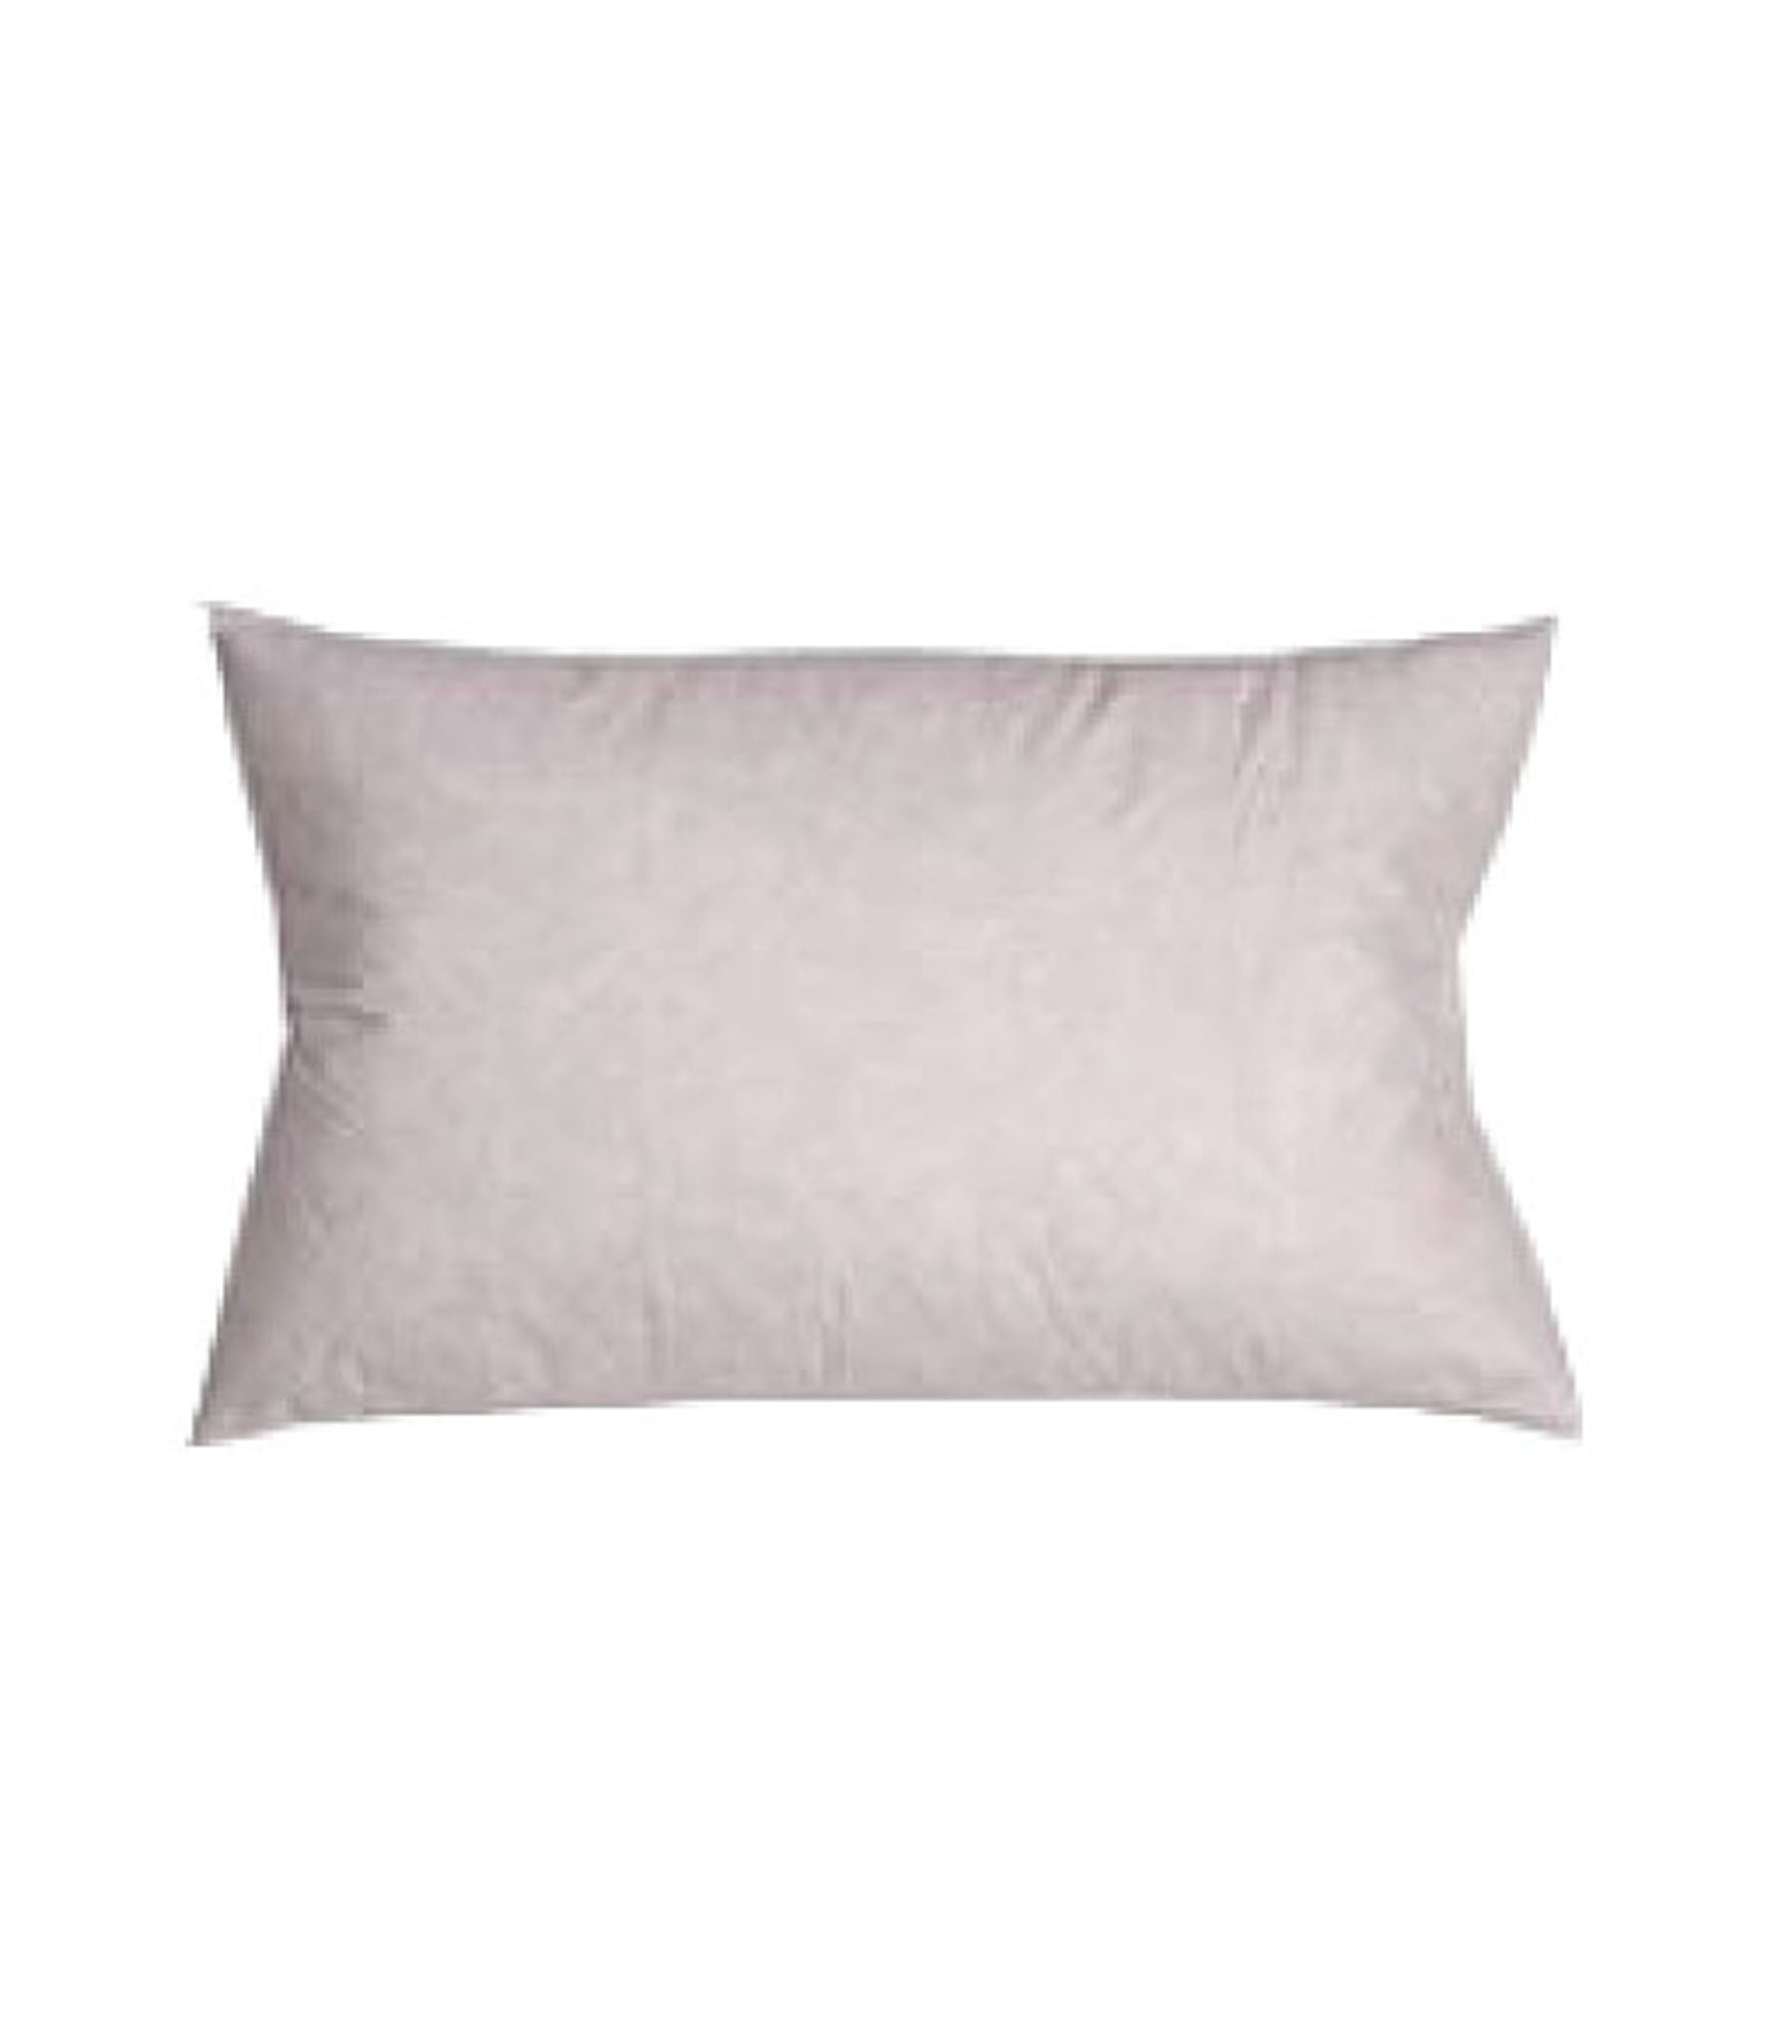 20 x 30 235TC Cotton-Rectangle Pillow Insert filled with Feathers and Down 